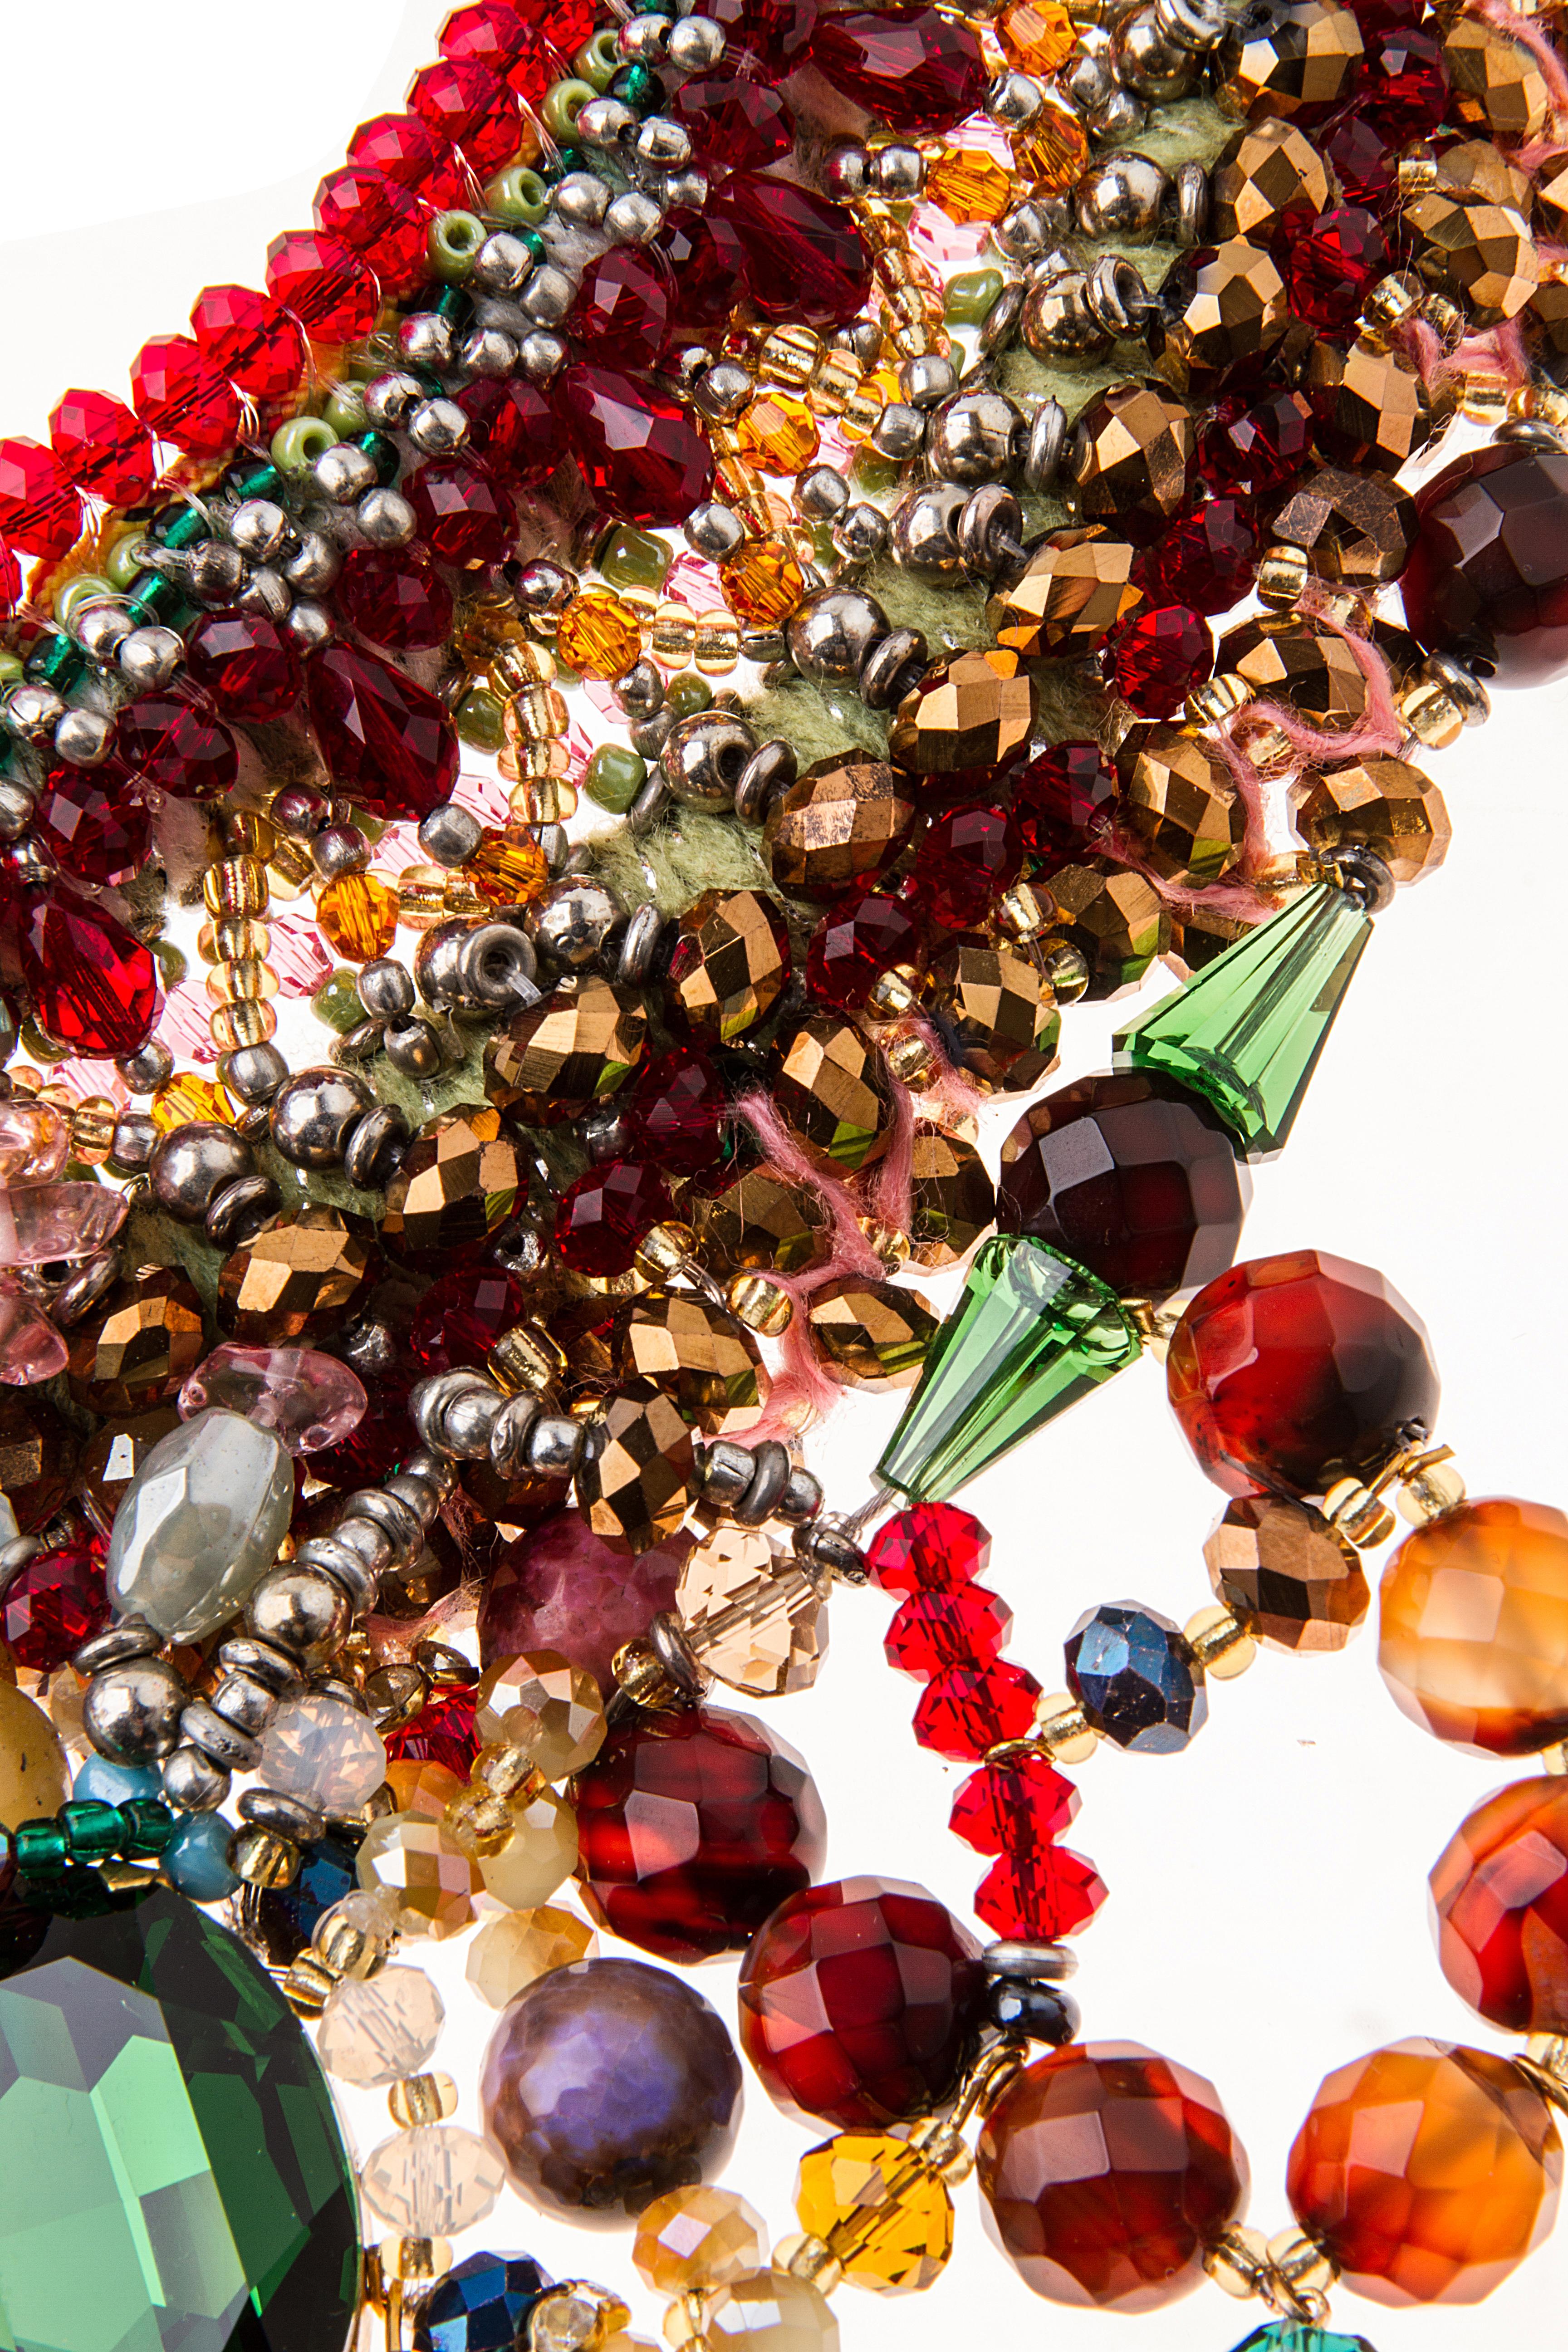 What is more luxurious than adorning your beautiful body with an impressive, one-of-a-kind collar design, full of life and colour, inspired by a lifelong and heartfelt love for creativity?
This necklace features a striking combination of gemstones